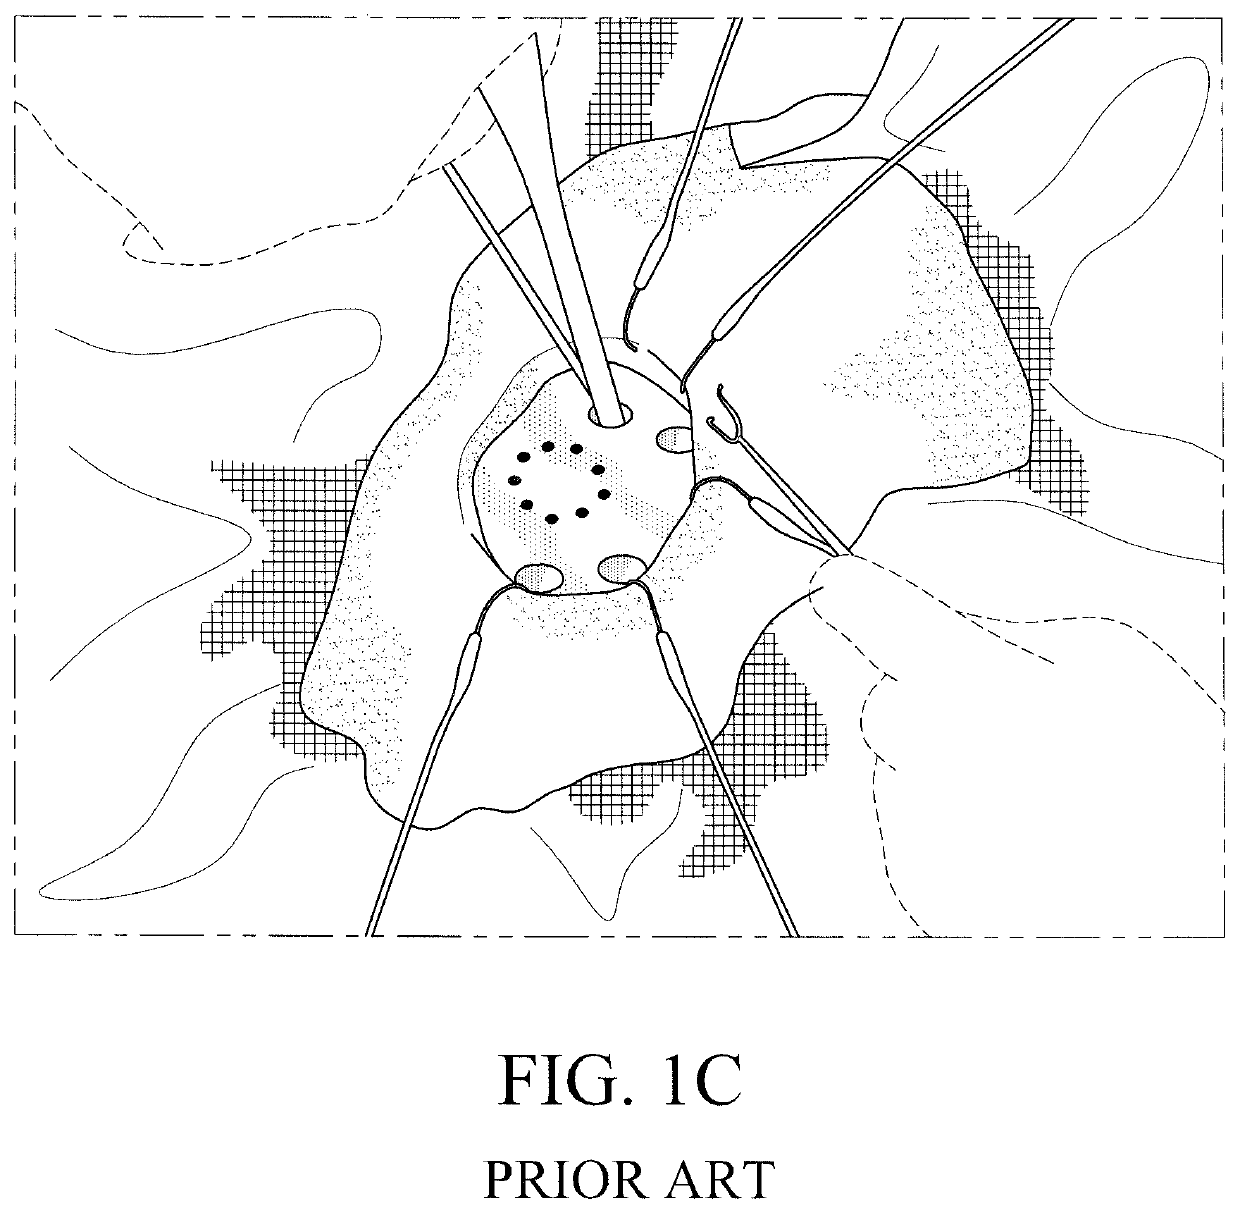 Method for performing single-stage cranioplasty reconstruction with a clear custom cranial implant